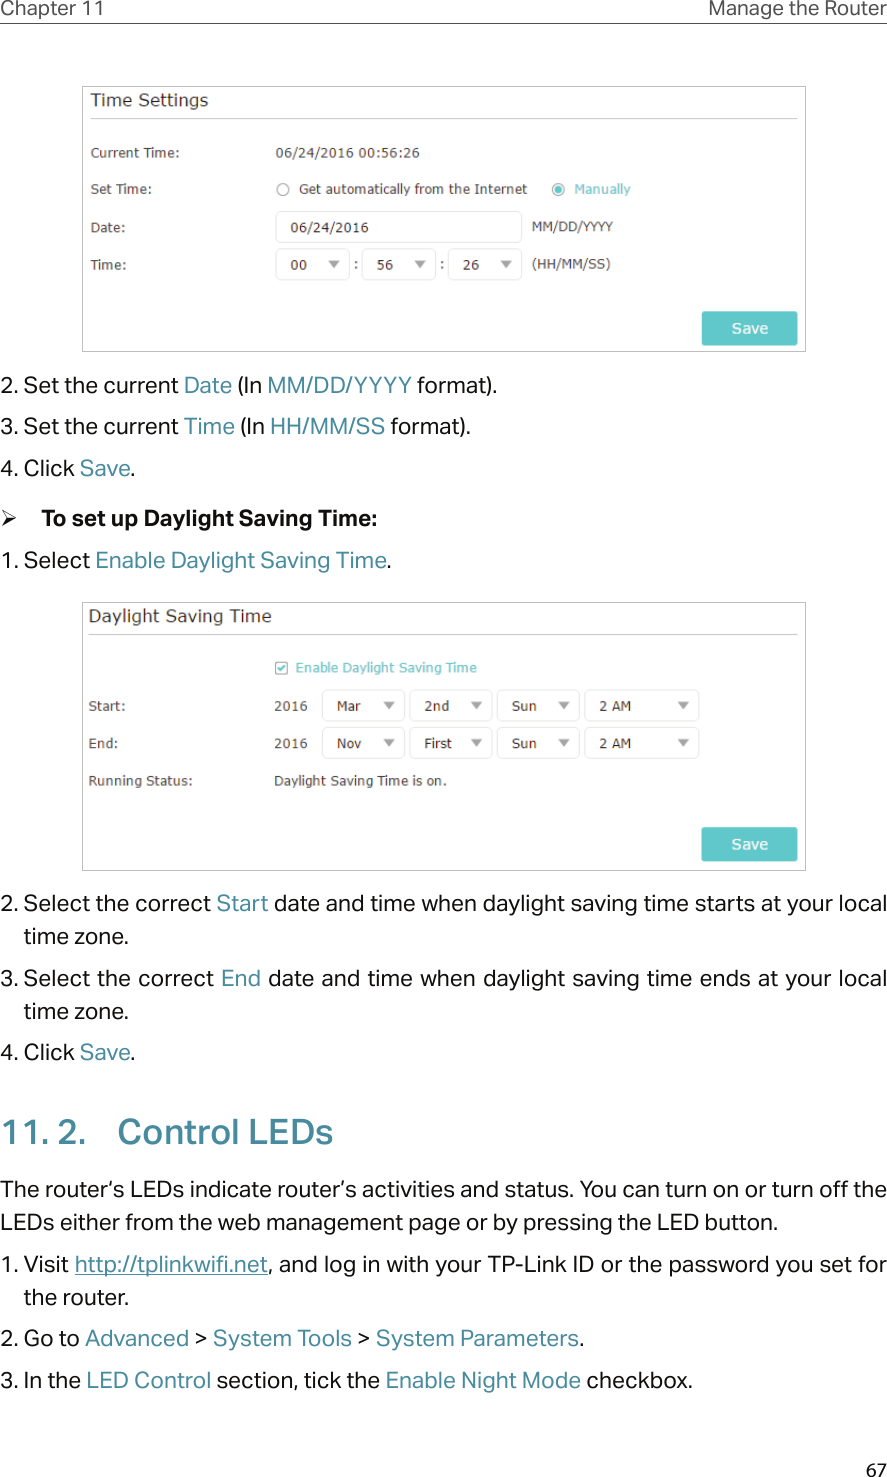 67Chapter 11 Manage the Router 2. Set the current Date (In MM/DD/YYYY format).3. Set the current Time (In HH/MM/SS format).4. Click Save. ¾To set up Daylight Saving Time:1. Select Enable Daylight Saving Time.2. Select the correct Start date and time when daylight saving time starts at your local time zone.3. Select the correct End date and time when daylight saving time ends at your local time zone.4. Click Save.11. 2.  Control LEDsThe router‘s LEDs indicate router’s activities and status. You can turn on or turn off the LEDs either from the web management page or by pressing the LED button.1. Visit http://tplinkwifi.net, and log in with your TP-Link ID or the password you set for the router.2. Go to Advanced &gt; System Tools &gt; System Parameters.3. In the LED Control section, tick the Enable Night Mode checkbox.